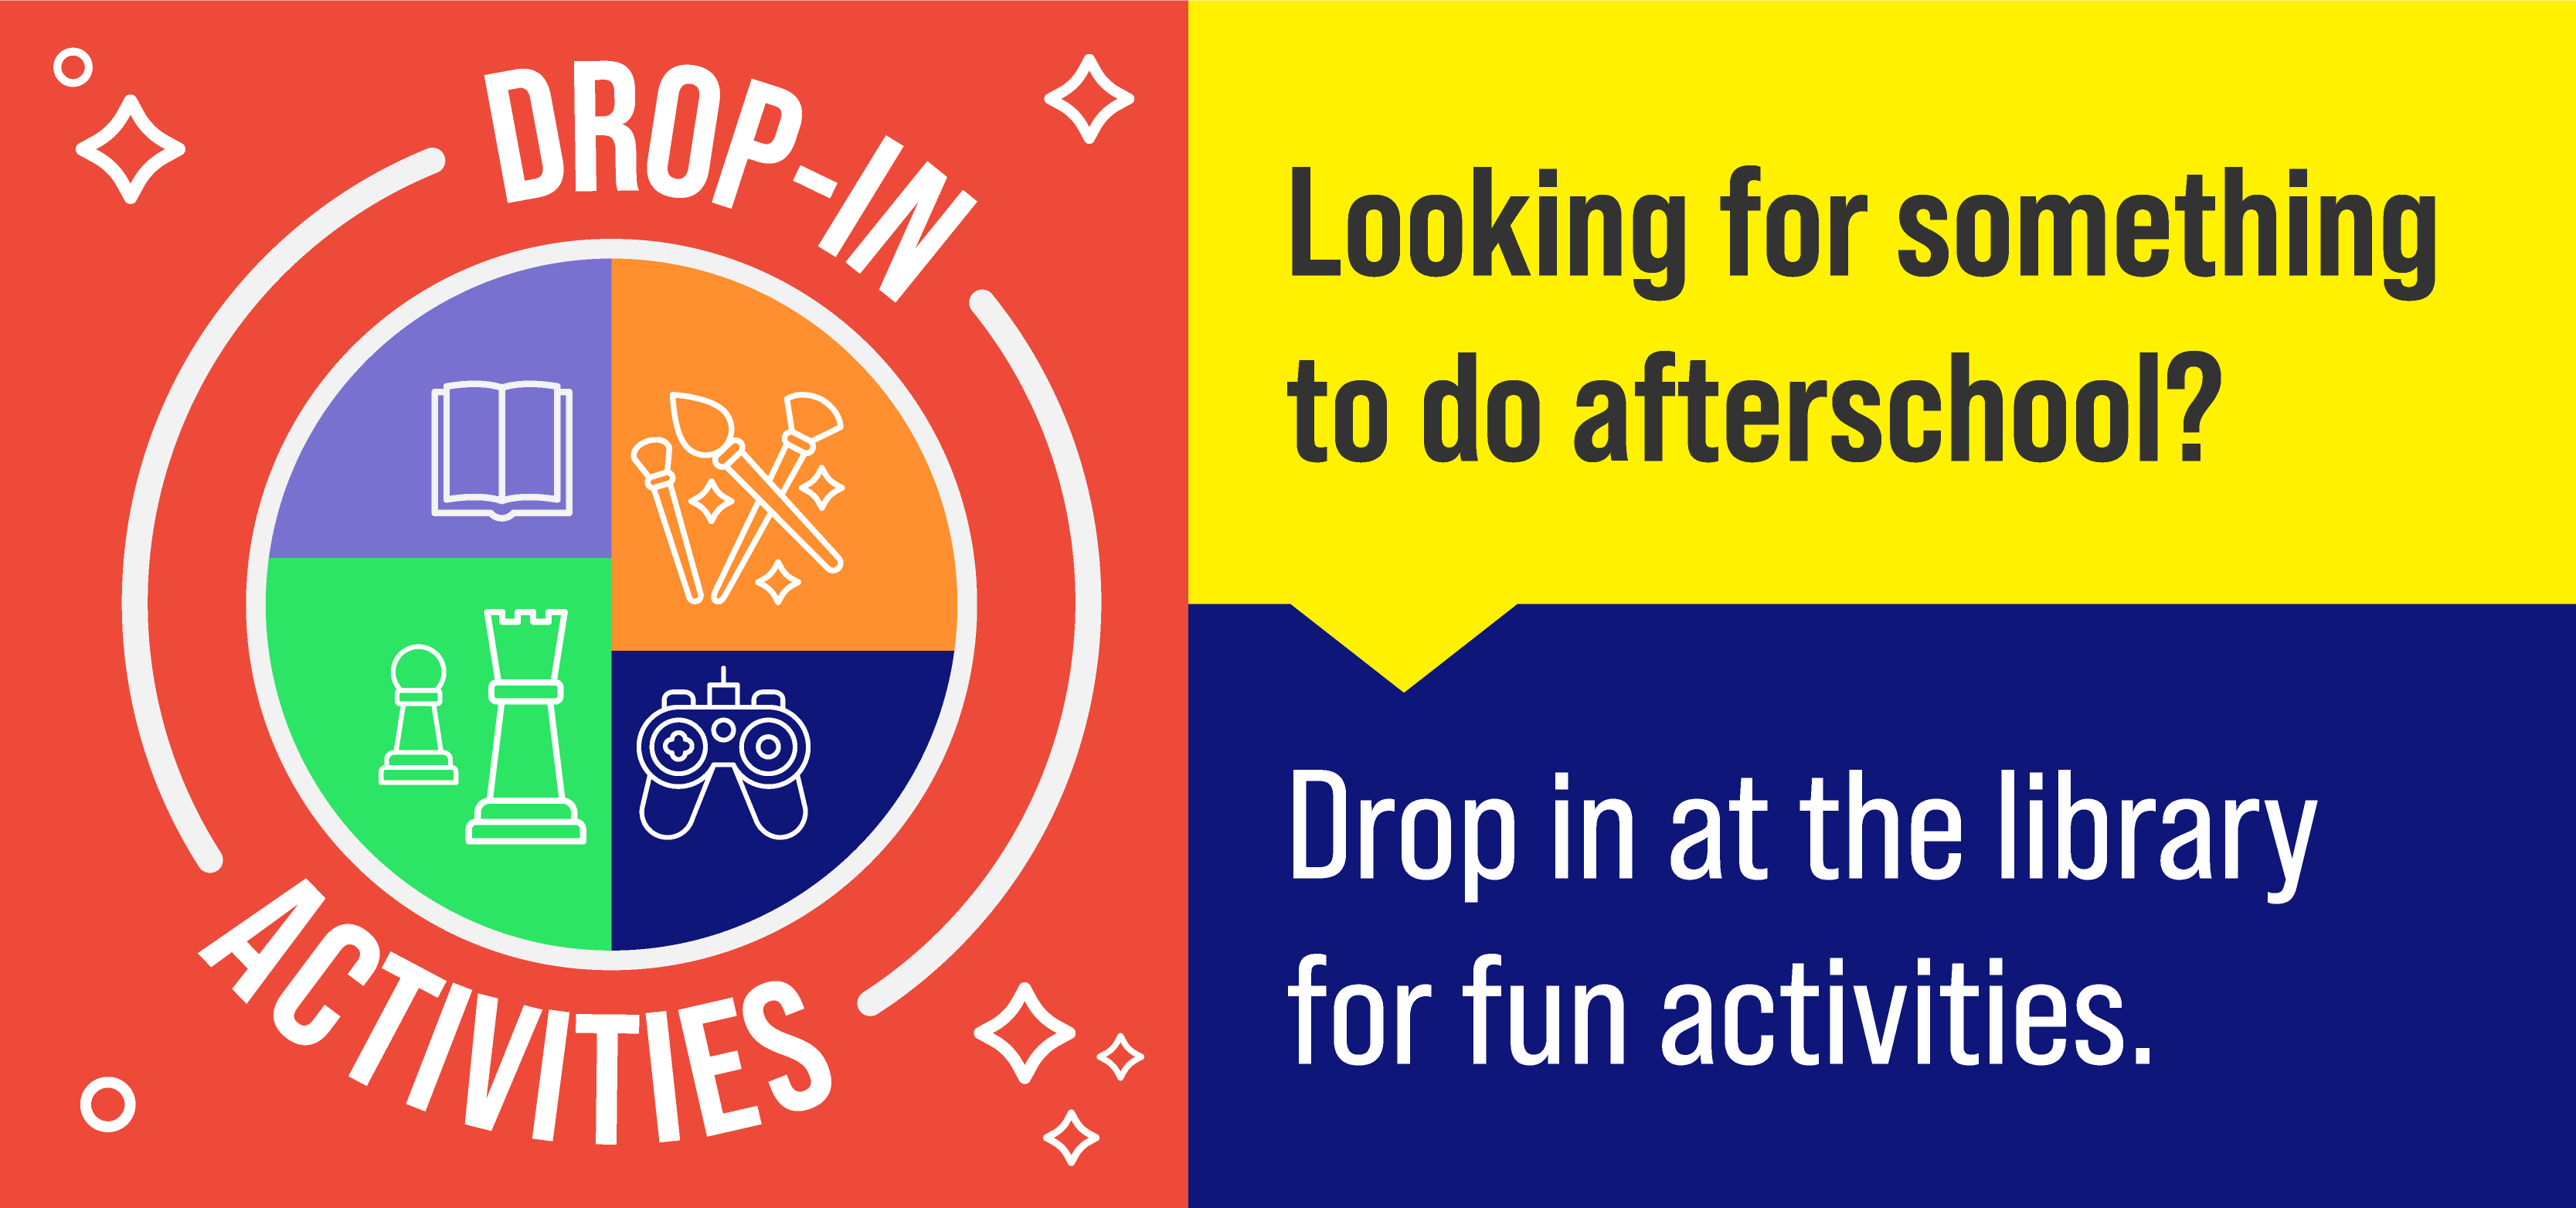 Teen - Drop-In Activities | Looking for something to do after school? Drop in at the library for fun activities